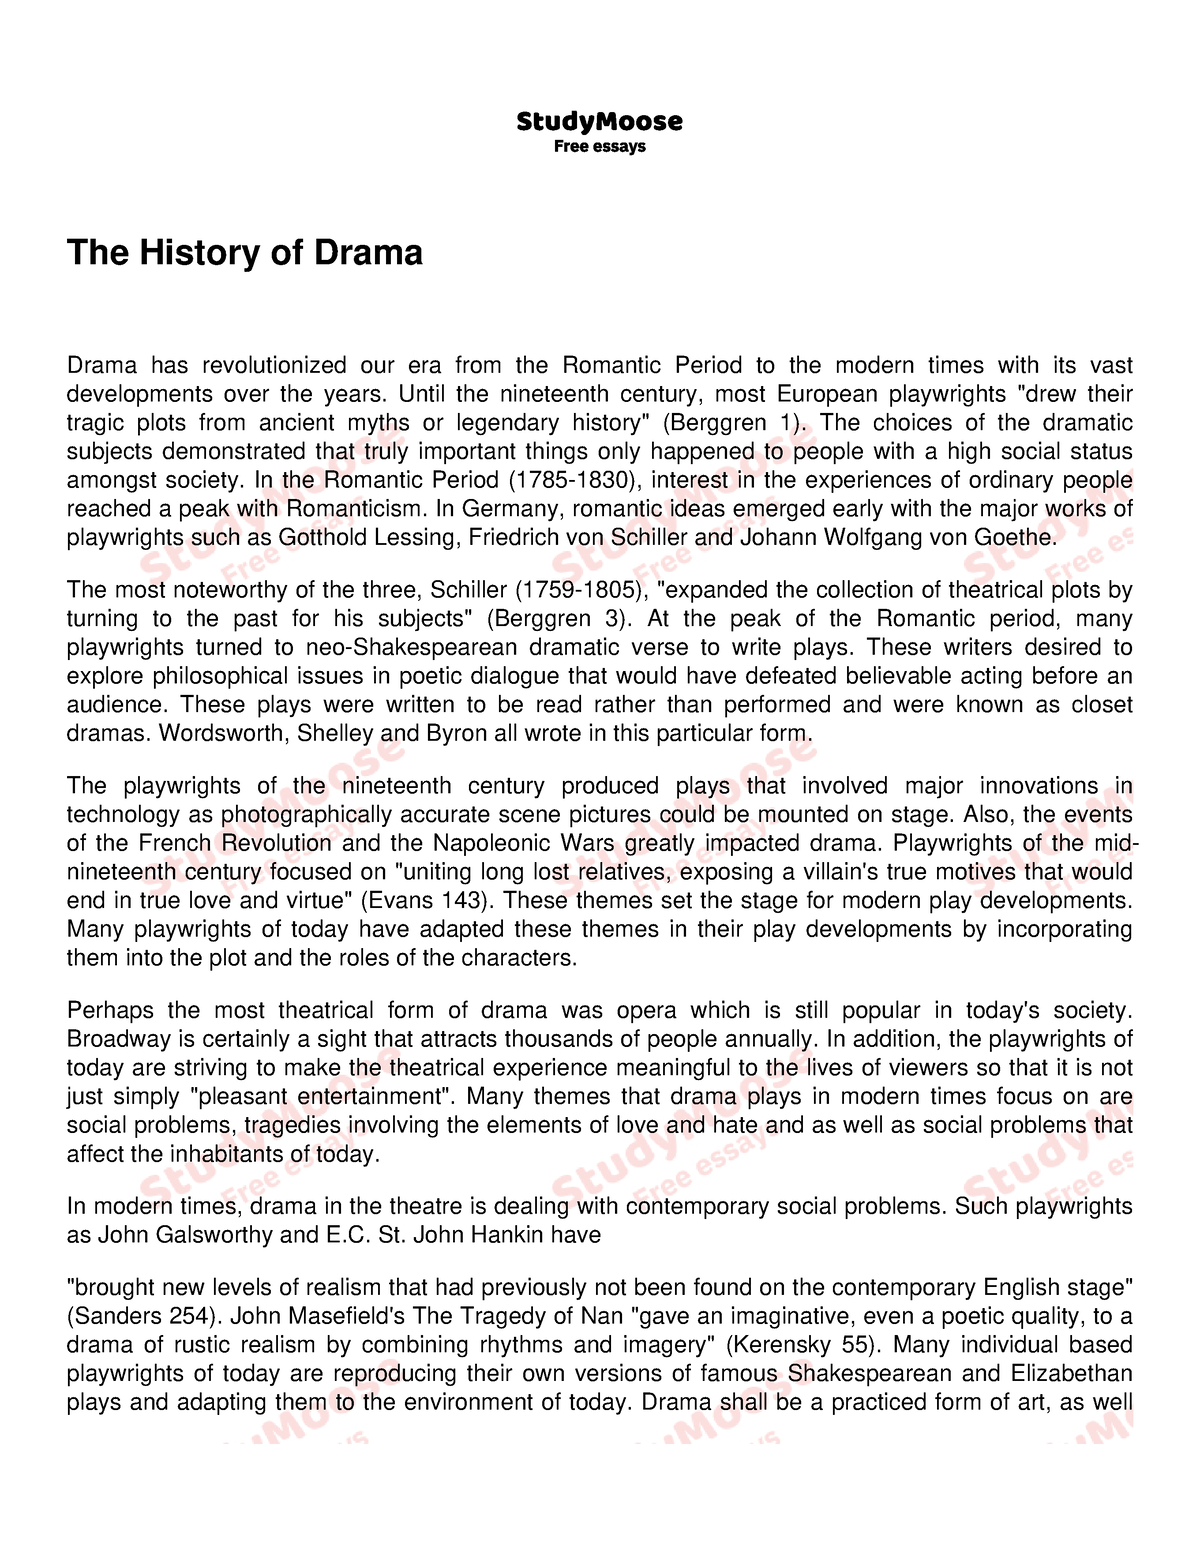 history of drama assignment